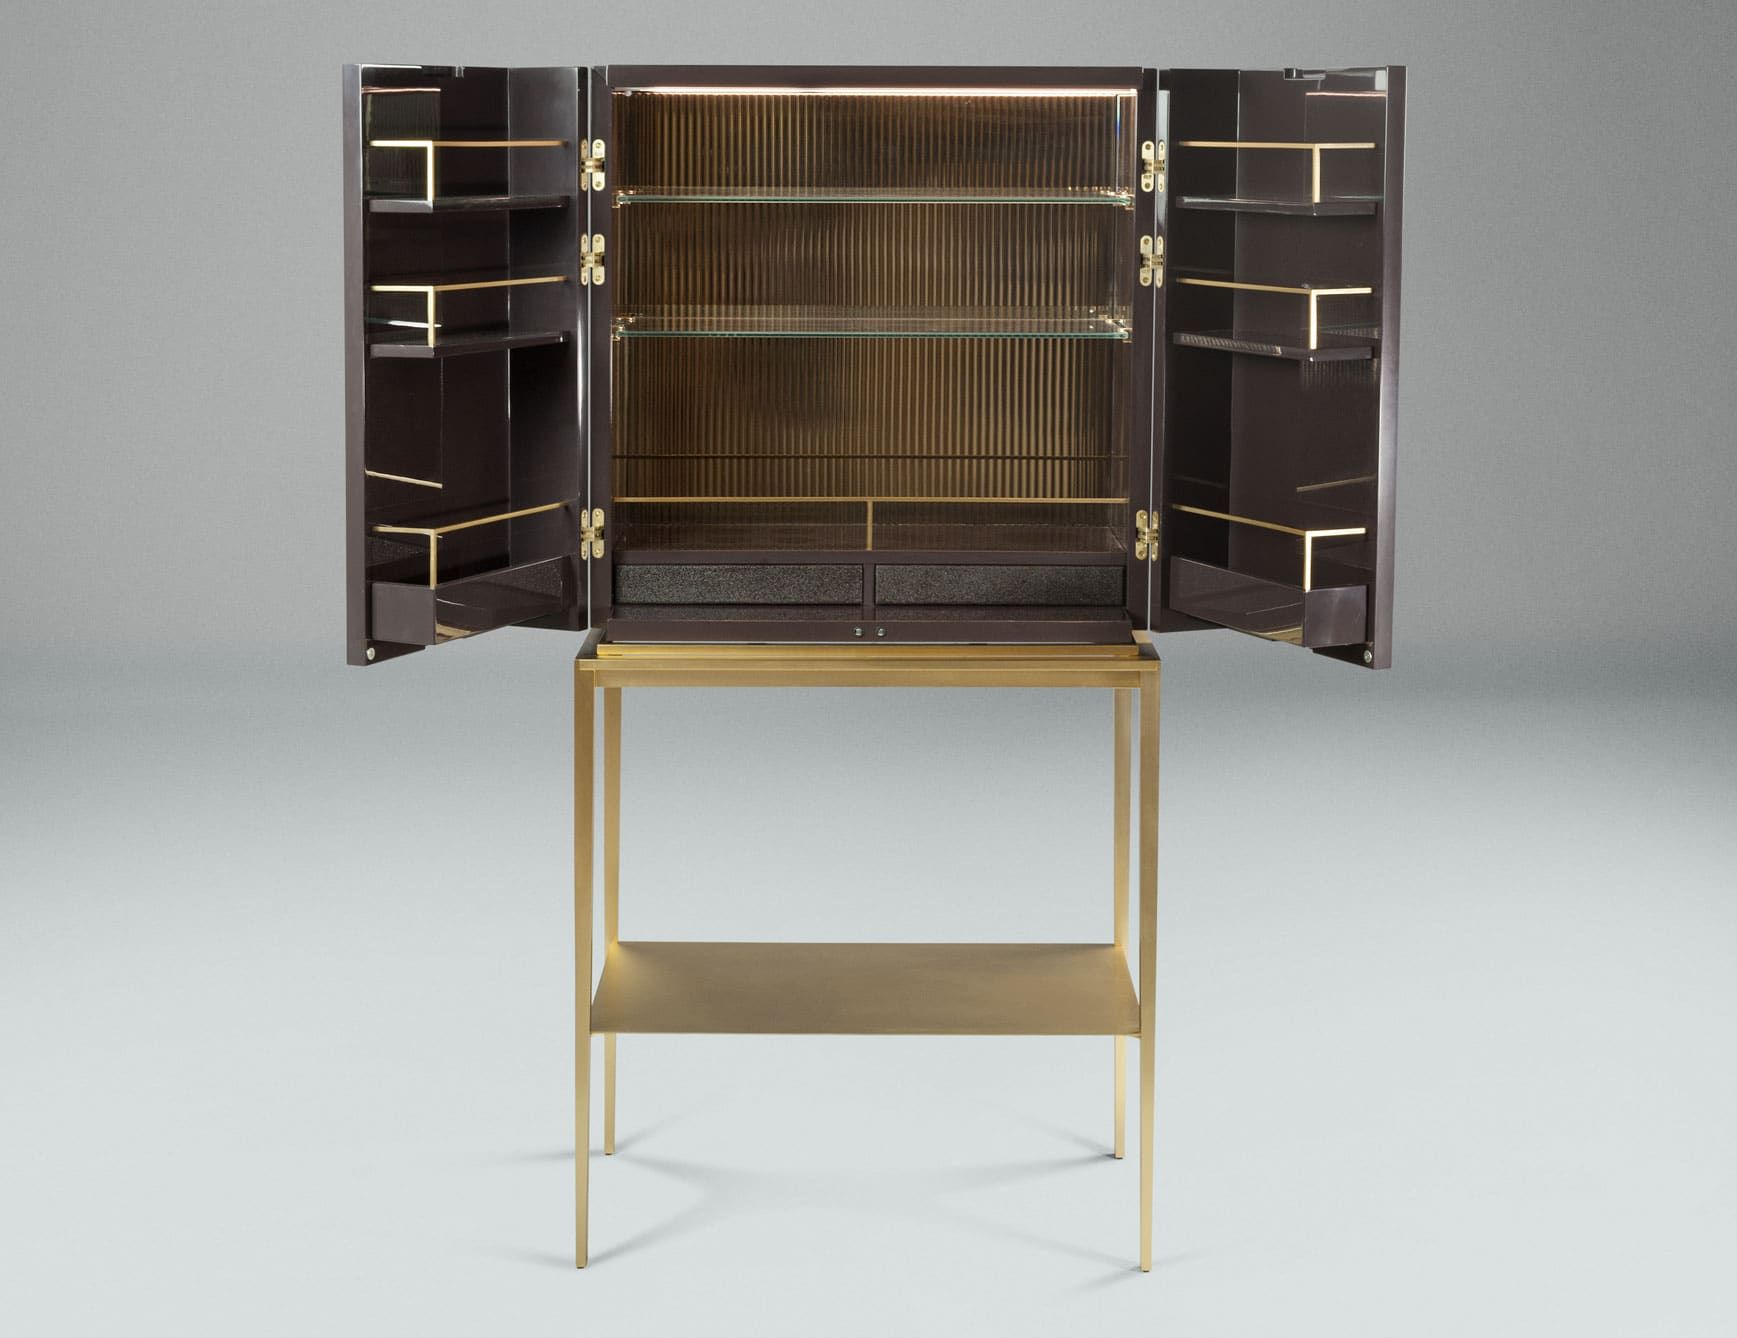 For Living Peacock modern luxury cabinet with brown leather